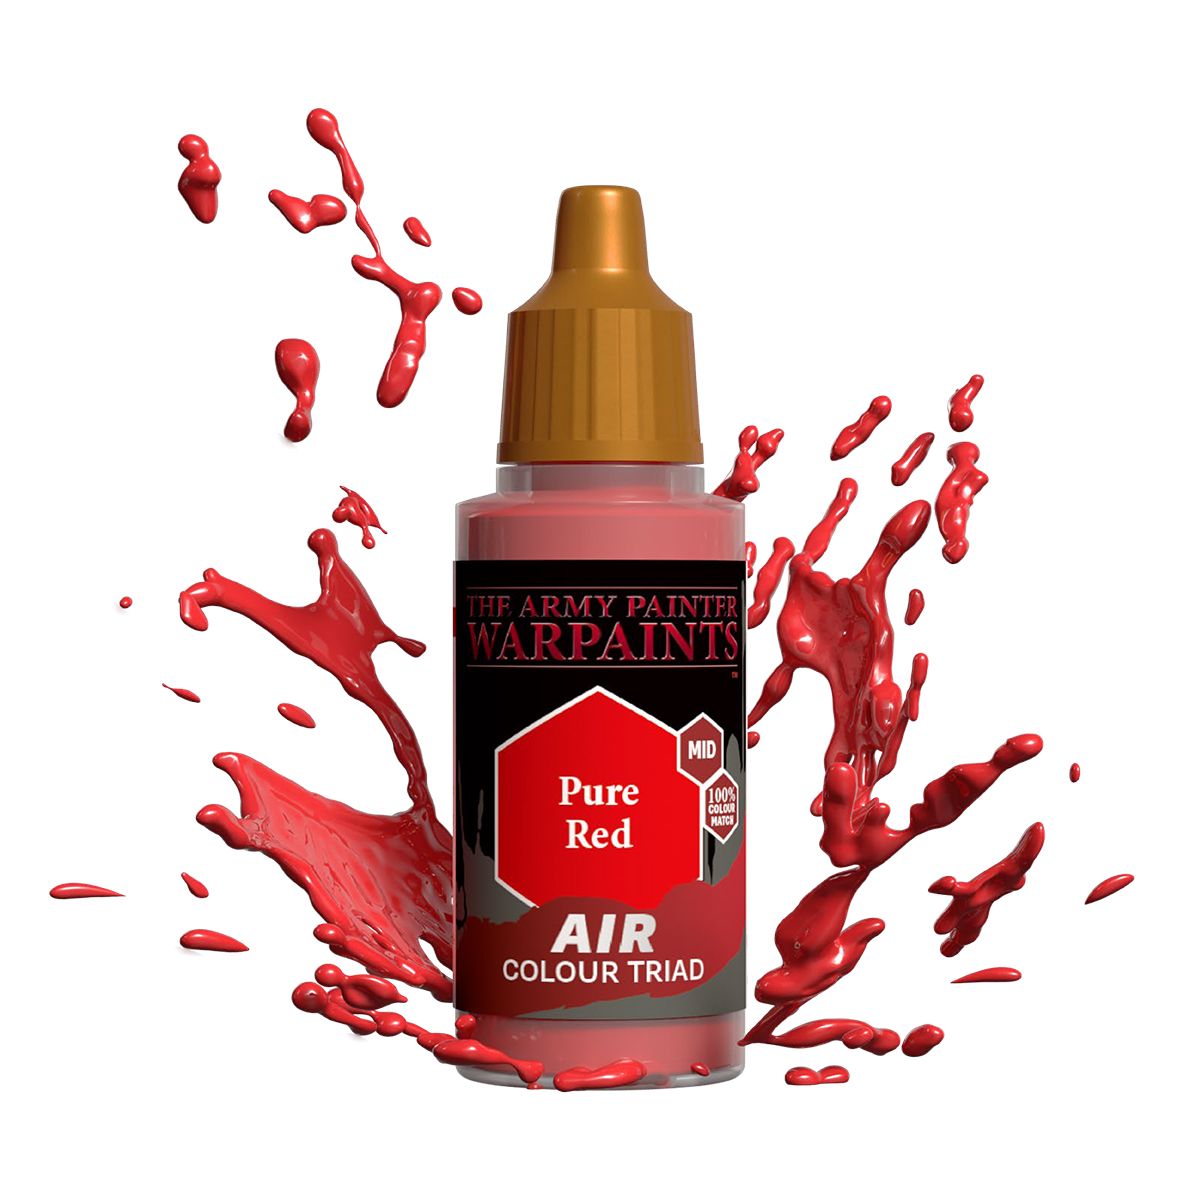 Army Painter Warpaints - Air Pure Red Acrylic Paint 18ml